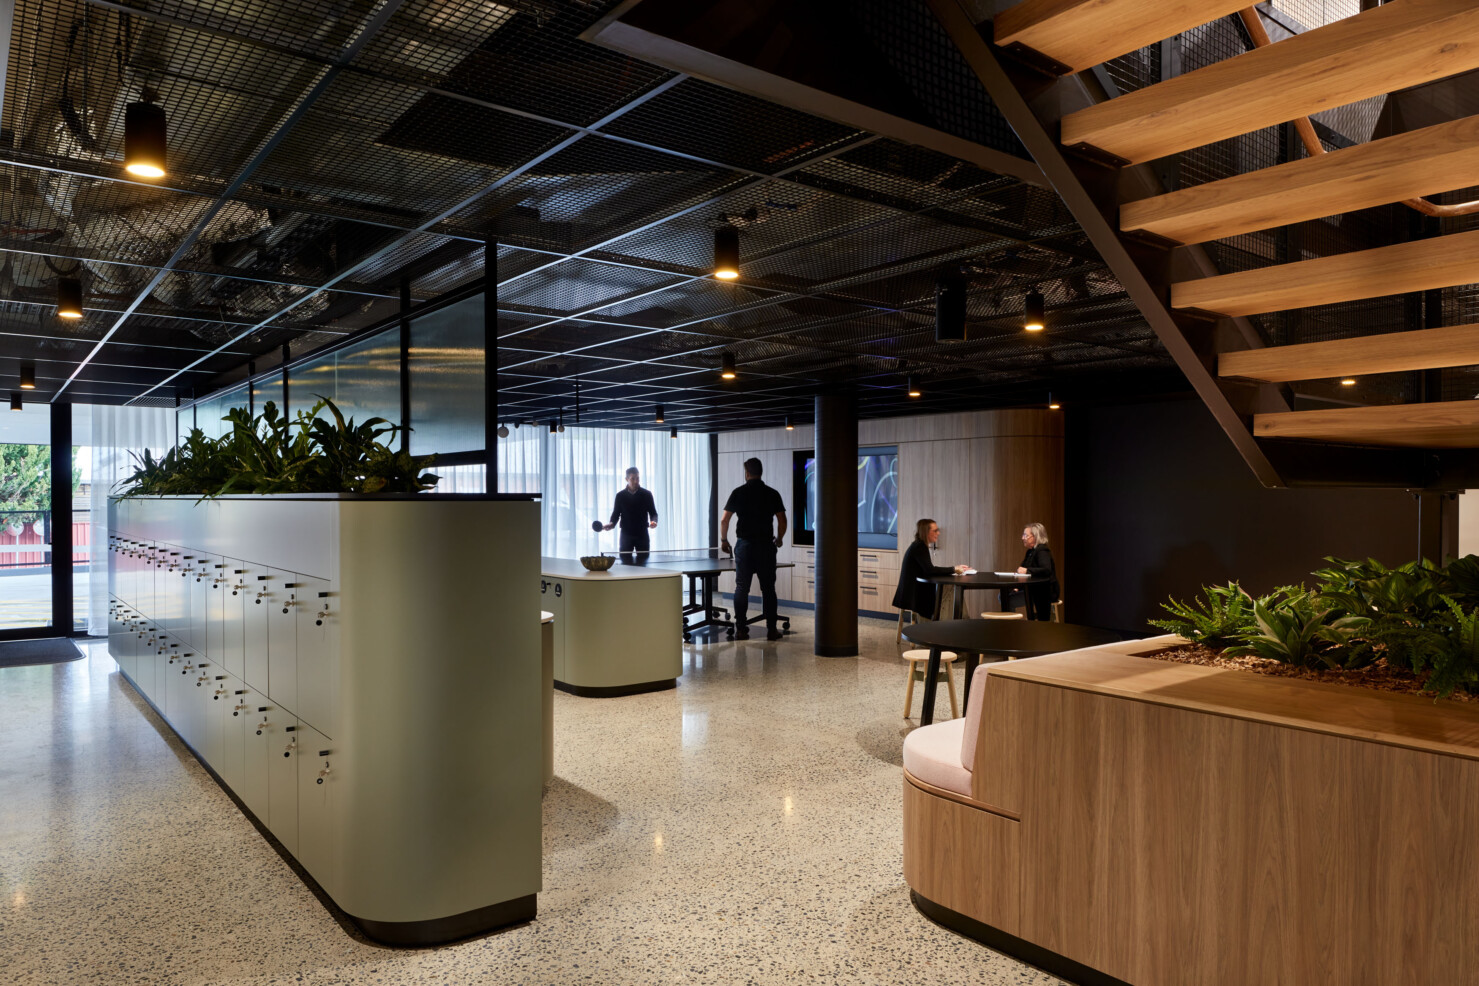 A central feature stairway becomes the gathering point for recreation and for staff to move about the office and interact with each other. Polished floors, black steel and exposed services are softened by plants, custom joinery in warm wood and soft furnishings in pale pink. A floating platform provides seating space together with cafe-style furniture and beanbags. A large kitchen and dining area is in the background with sheer curtains letting in light from the full height windows to the rear of the space. A large kitchen and breakout space on the lower level provides a multi-functional space for staff to interact and industry partners to gather together. Two staff play table tennis on the table in the breakout space. Another couple of staff hold an informal 'cafe style' meeting on a round black table in the space. A bank of lockers create the backbone of the kitchen and separate the space from amenities and are located near the car park for ease of access.